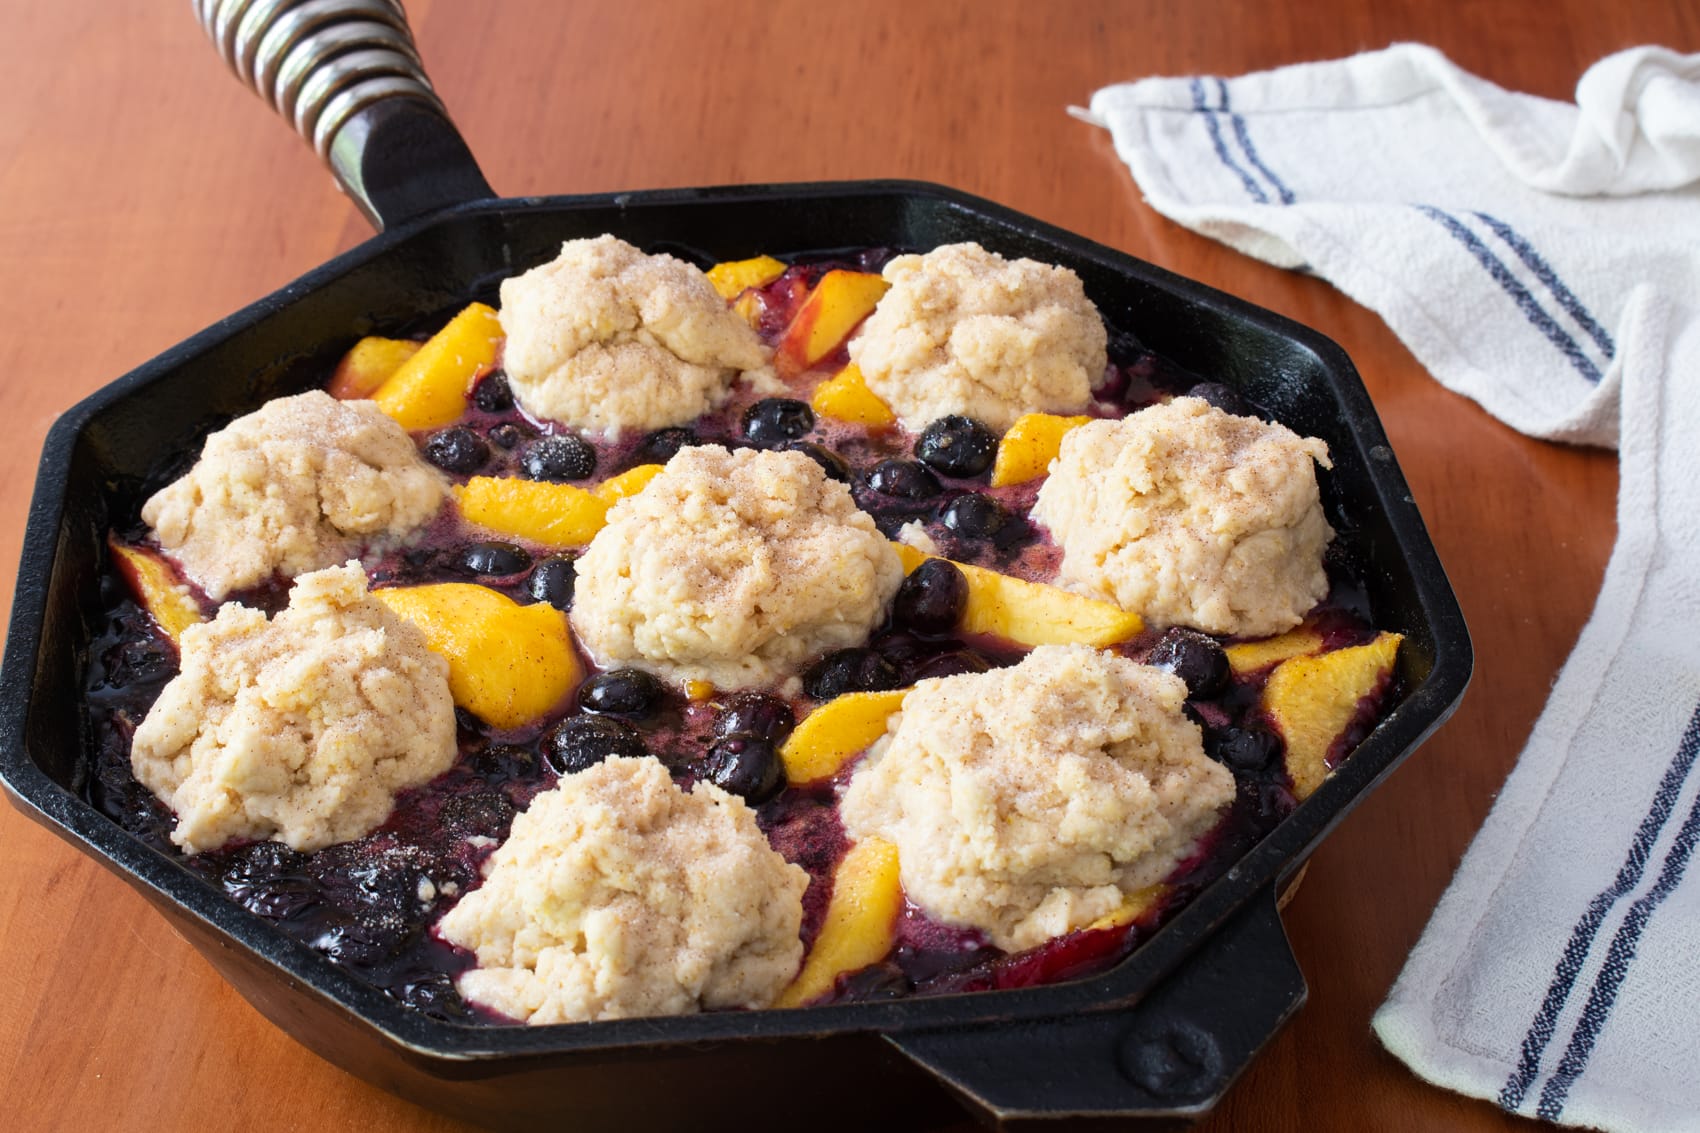 Skillet Peach and Blueberry Cobbler